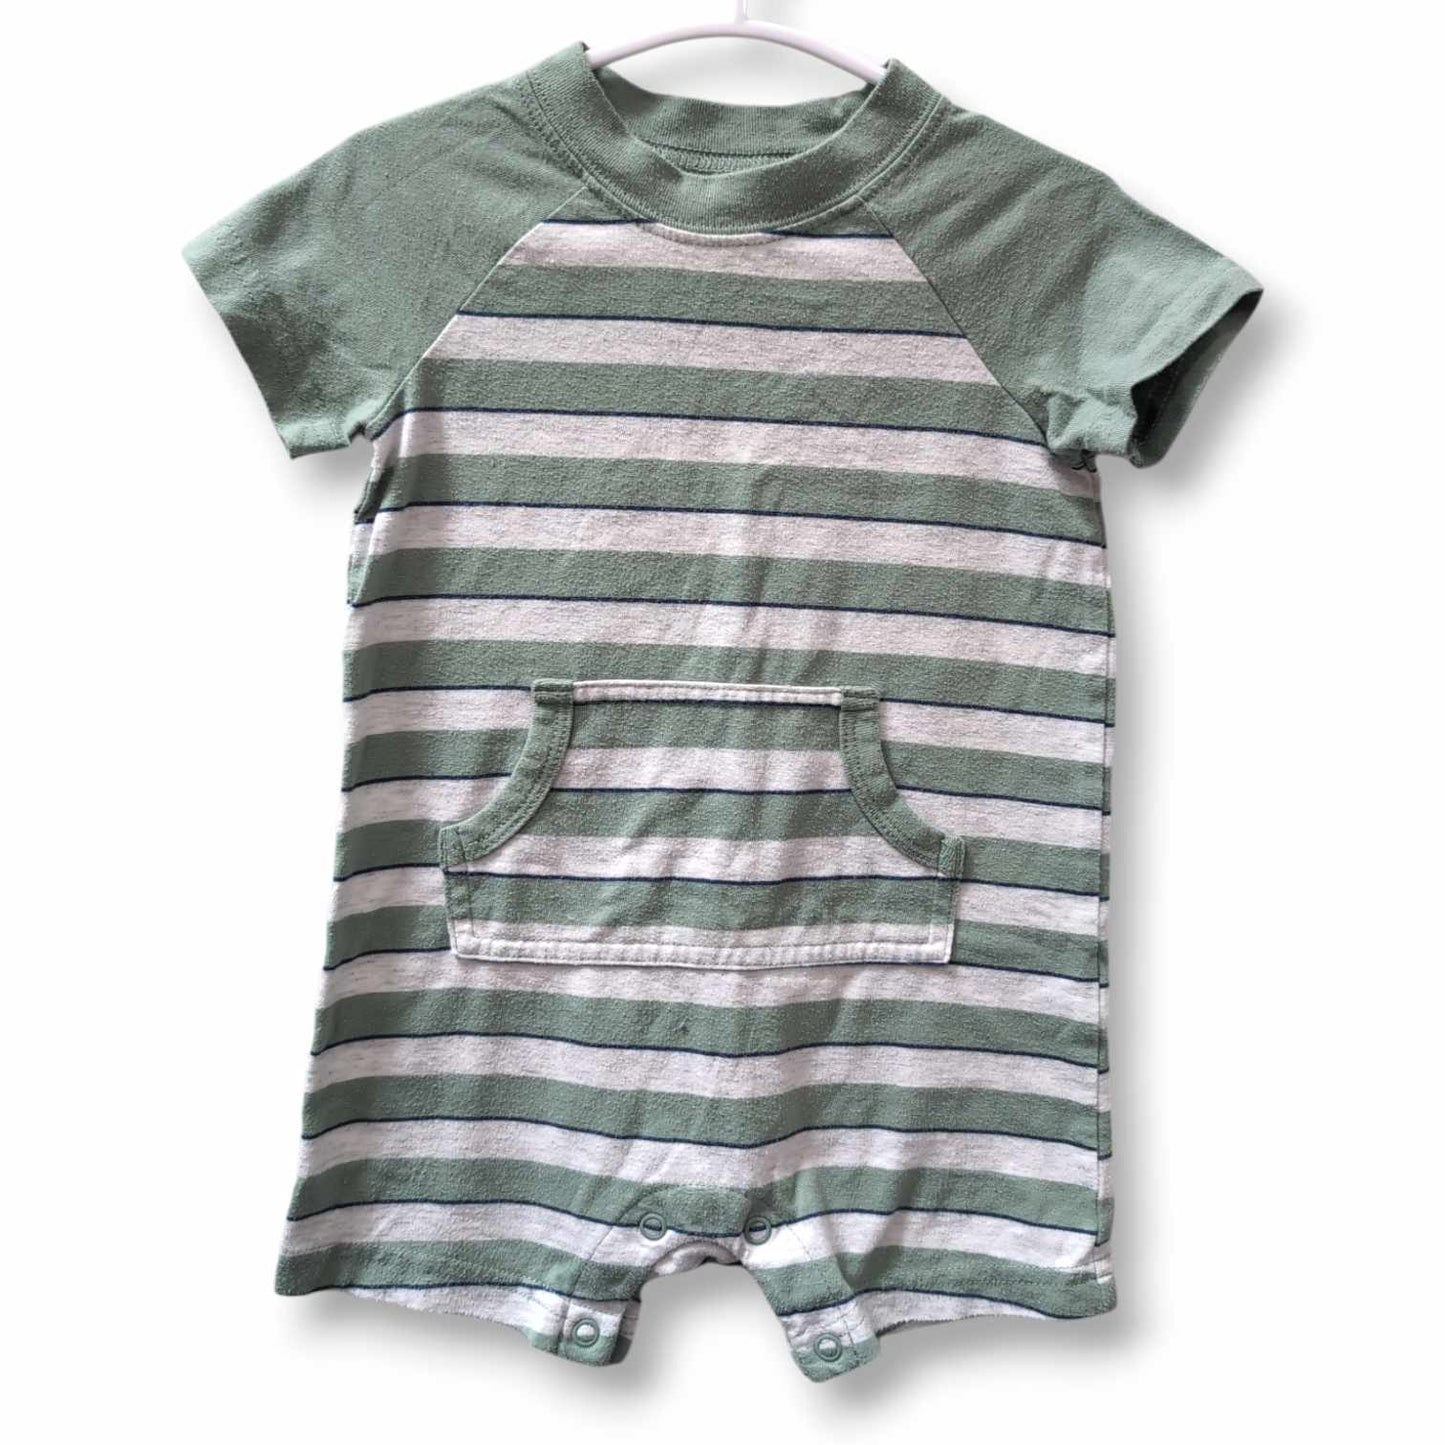 Carters 6-9M Romper (some piling)